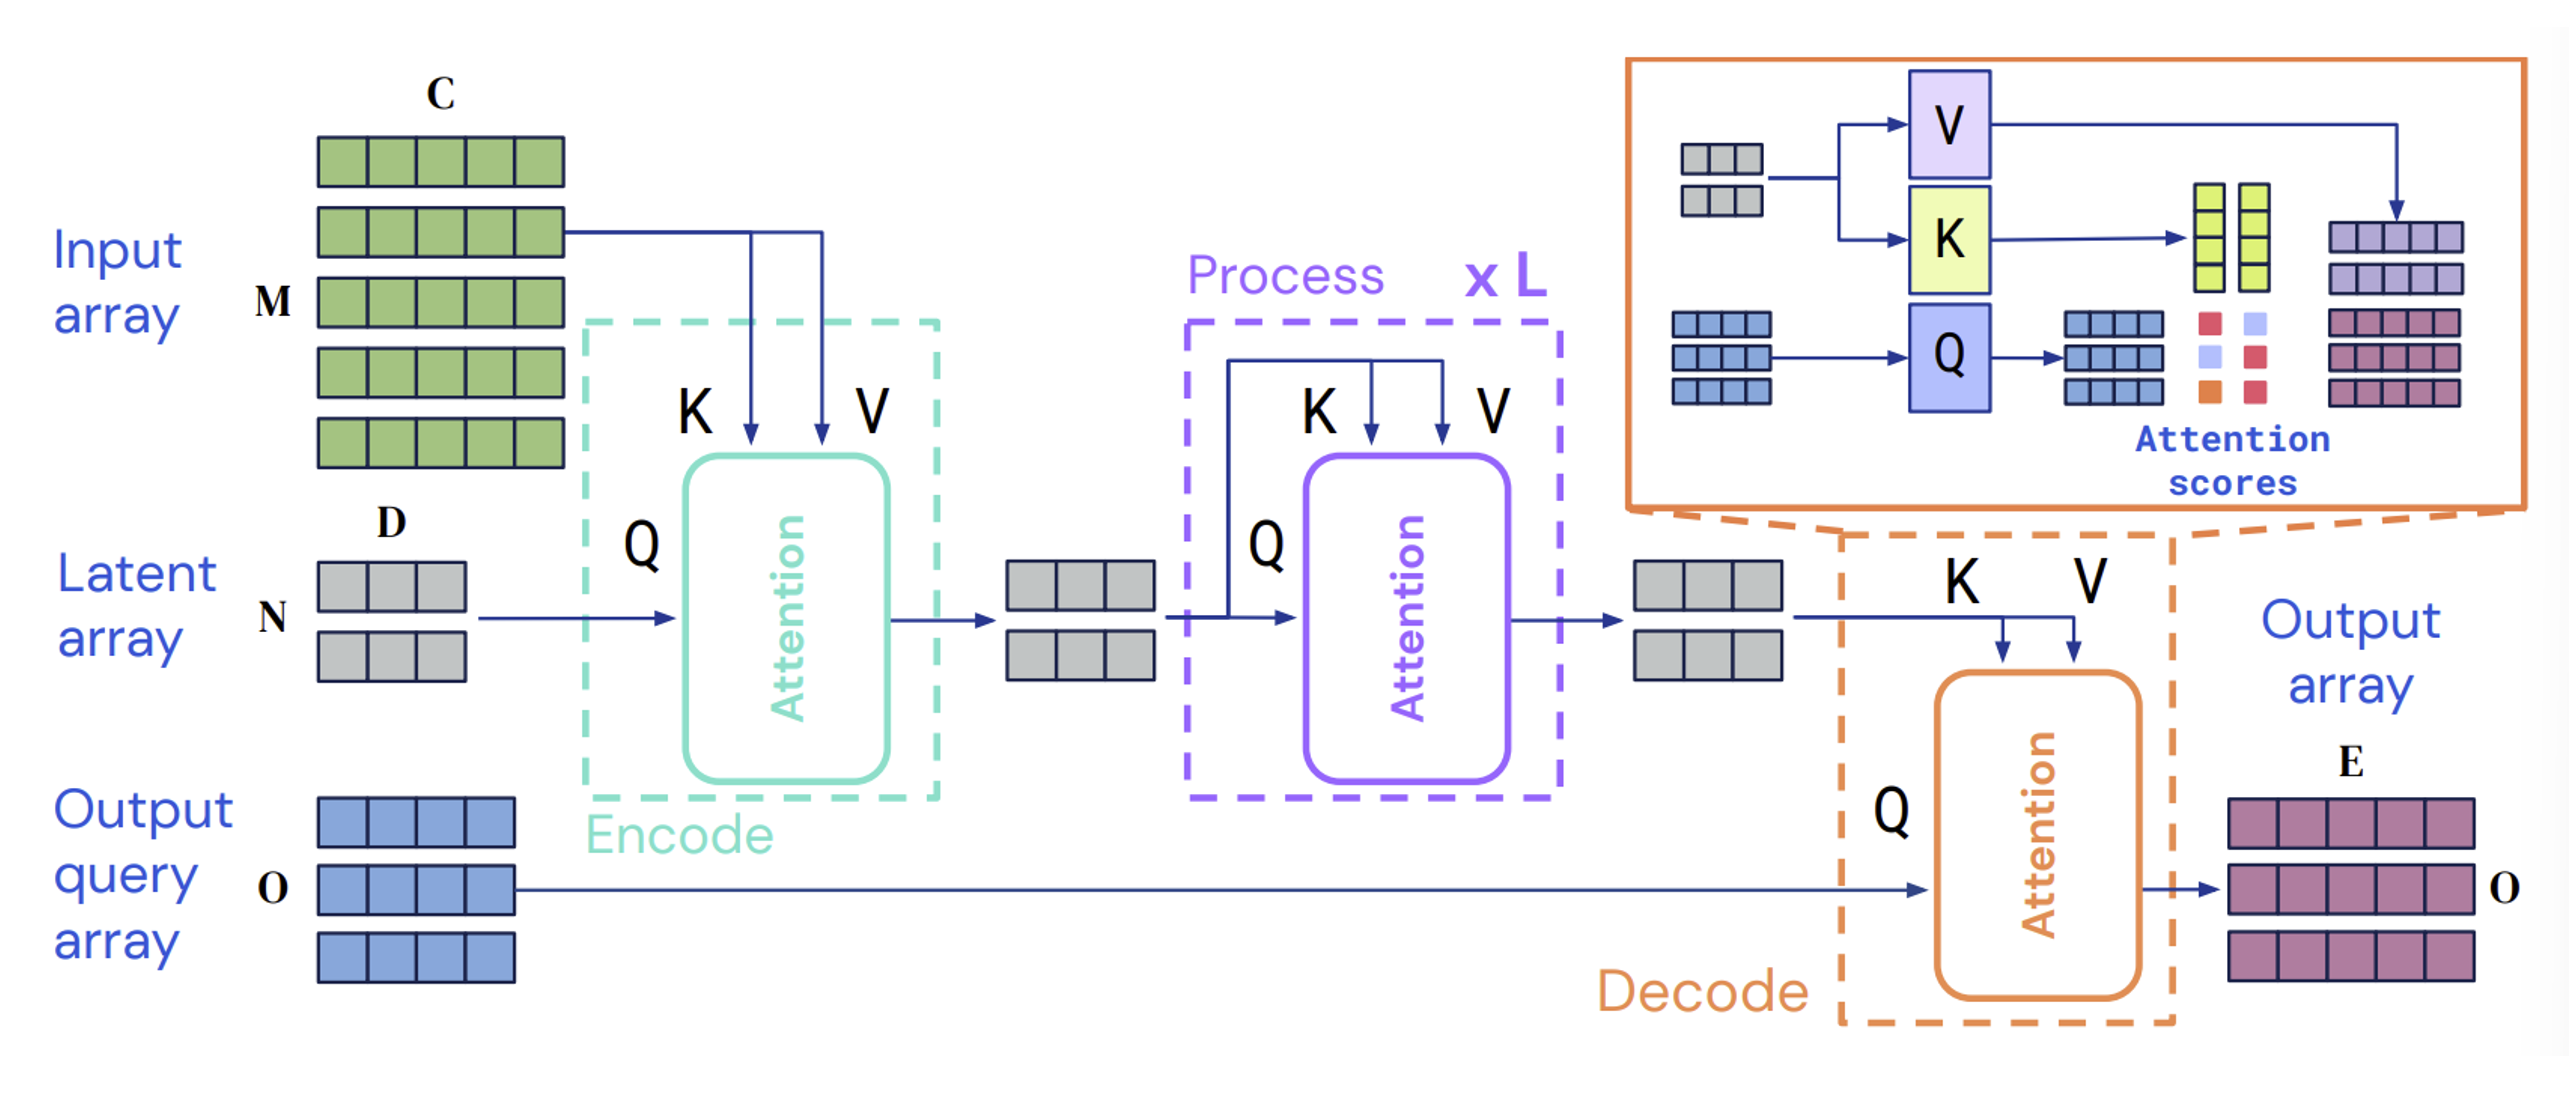 Perceiver encoder stack shows how the cross-attention mechanism transforms large inputs into smaller ones that can be processed by a vanilla Transformer encoder [@jaegle2021perceiver].